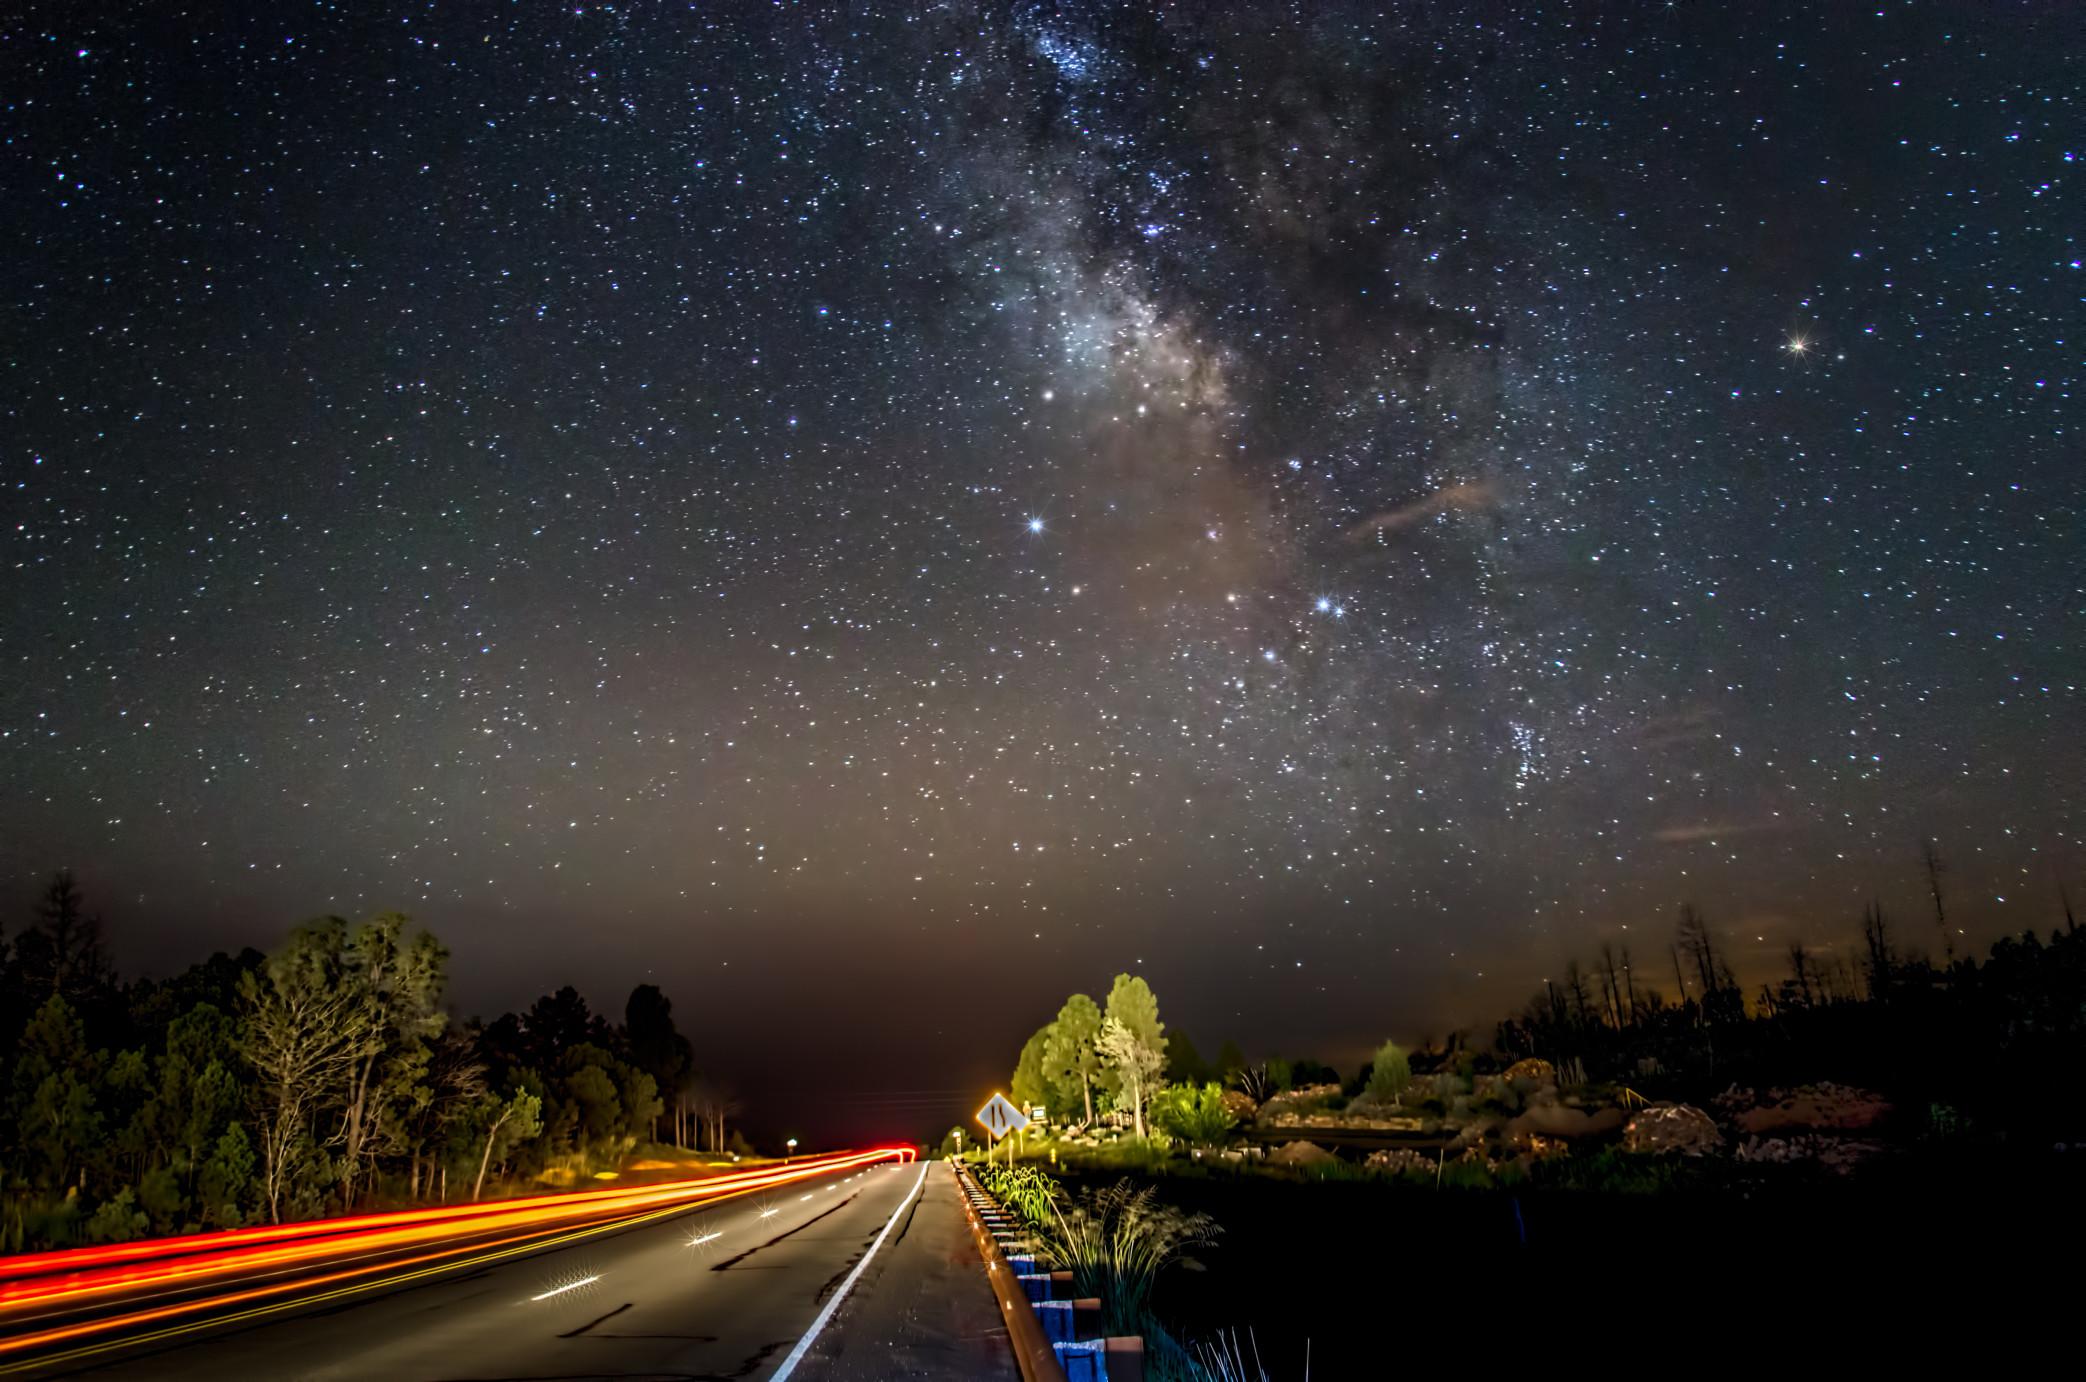 View of a stary sky over a road going through the desert. 